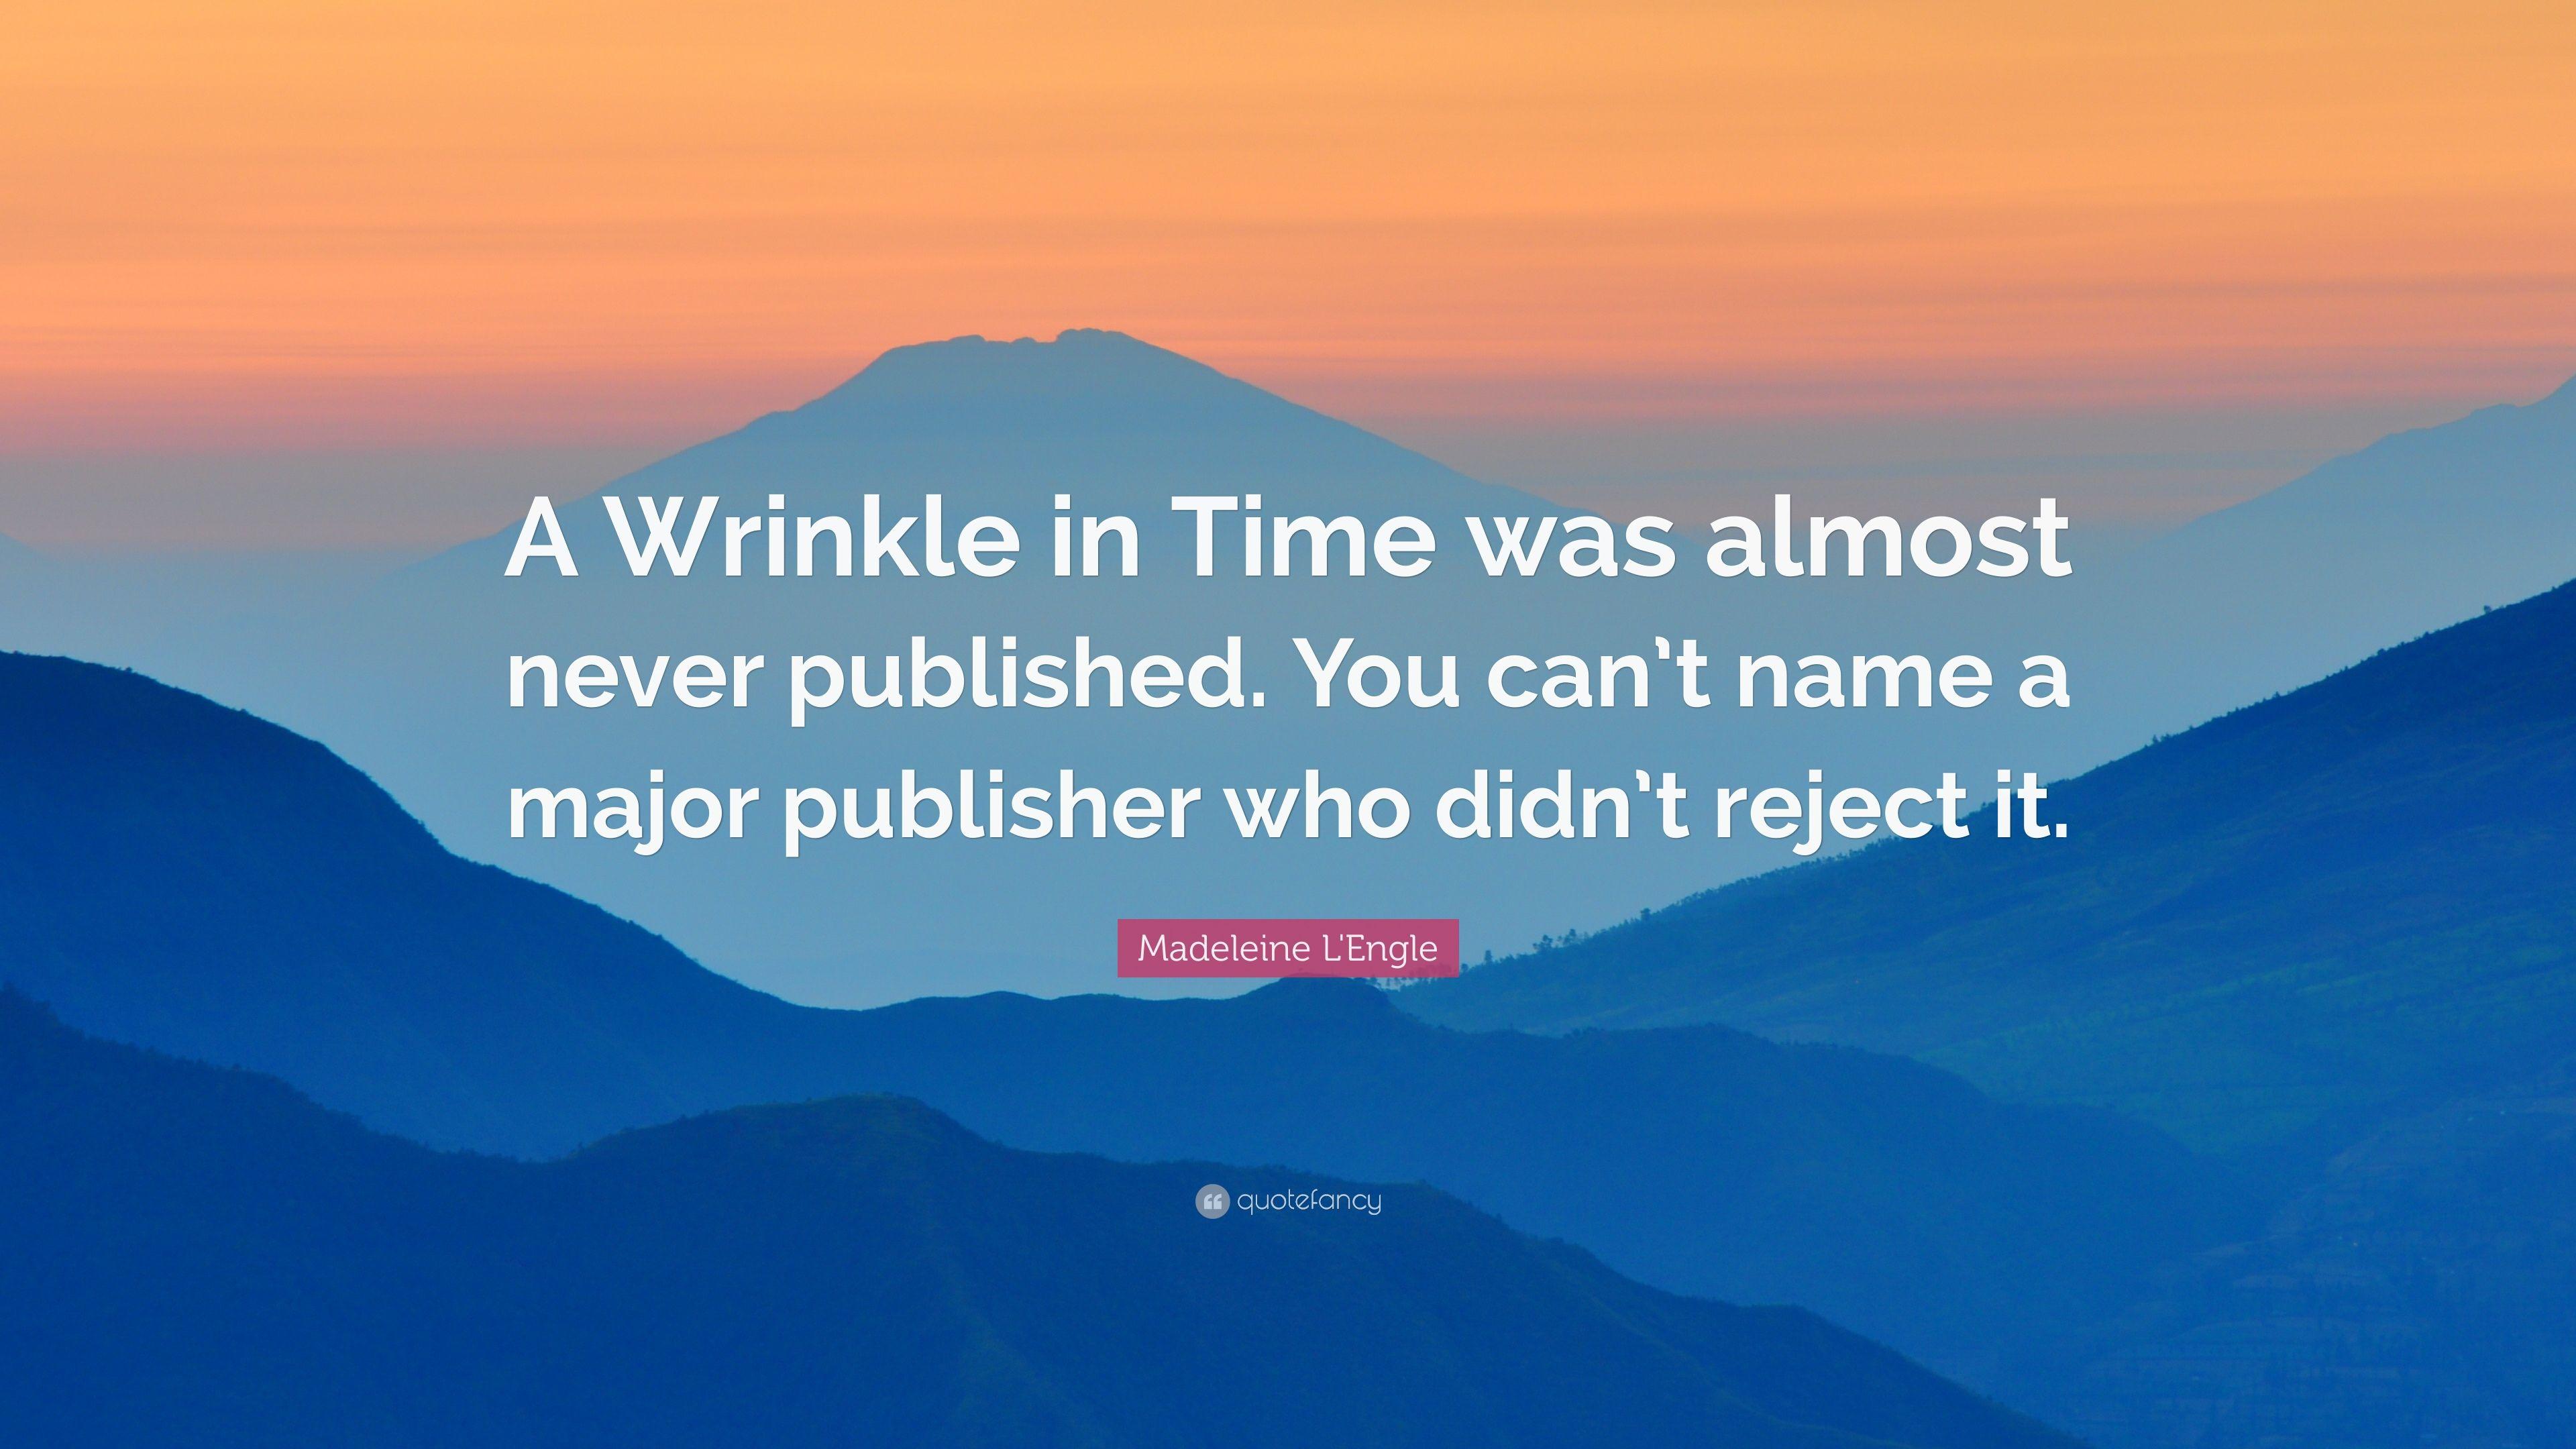 Madeleine L'Engle Quote: “A Wrinkle in Time was almost never